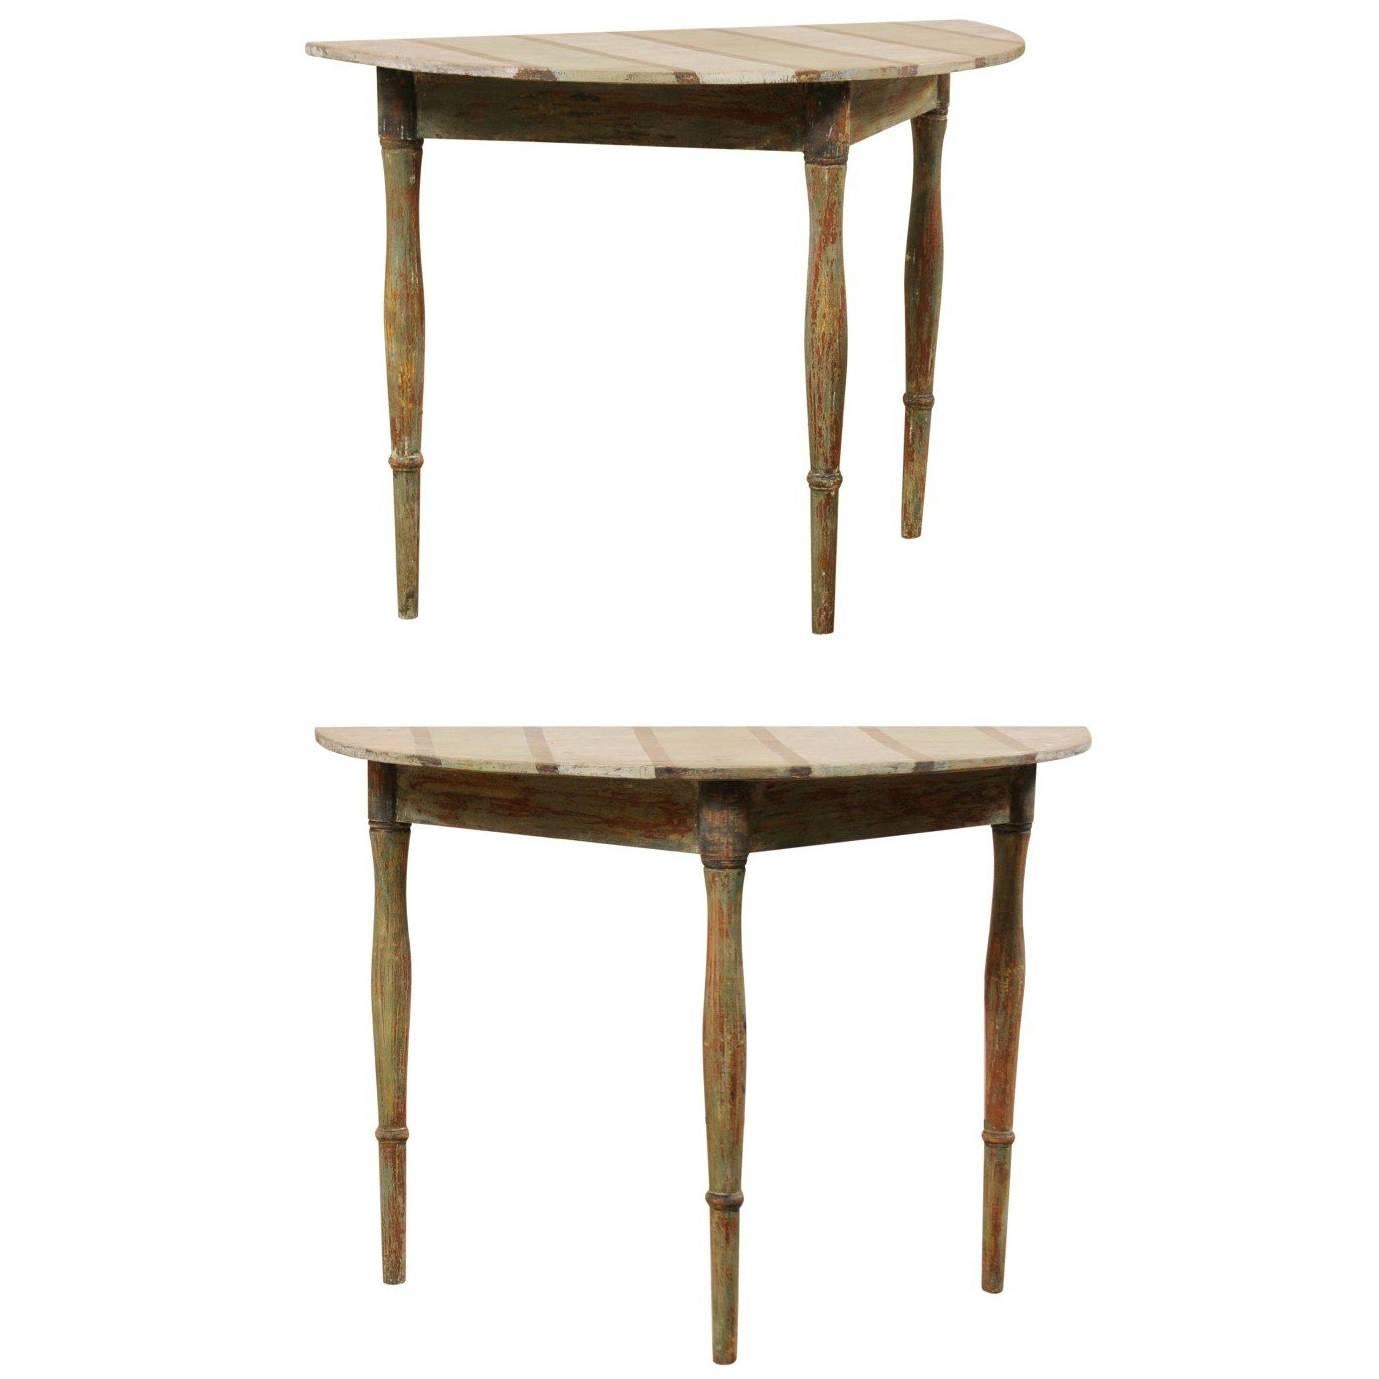 Pair of Swedish 19th Century Painted Wood Demilune Tables with Subtle Stripes